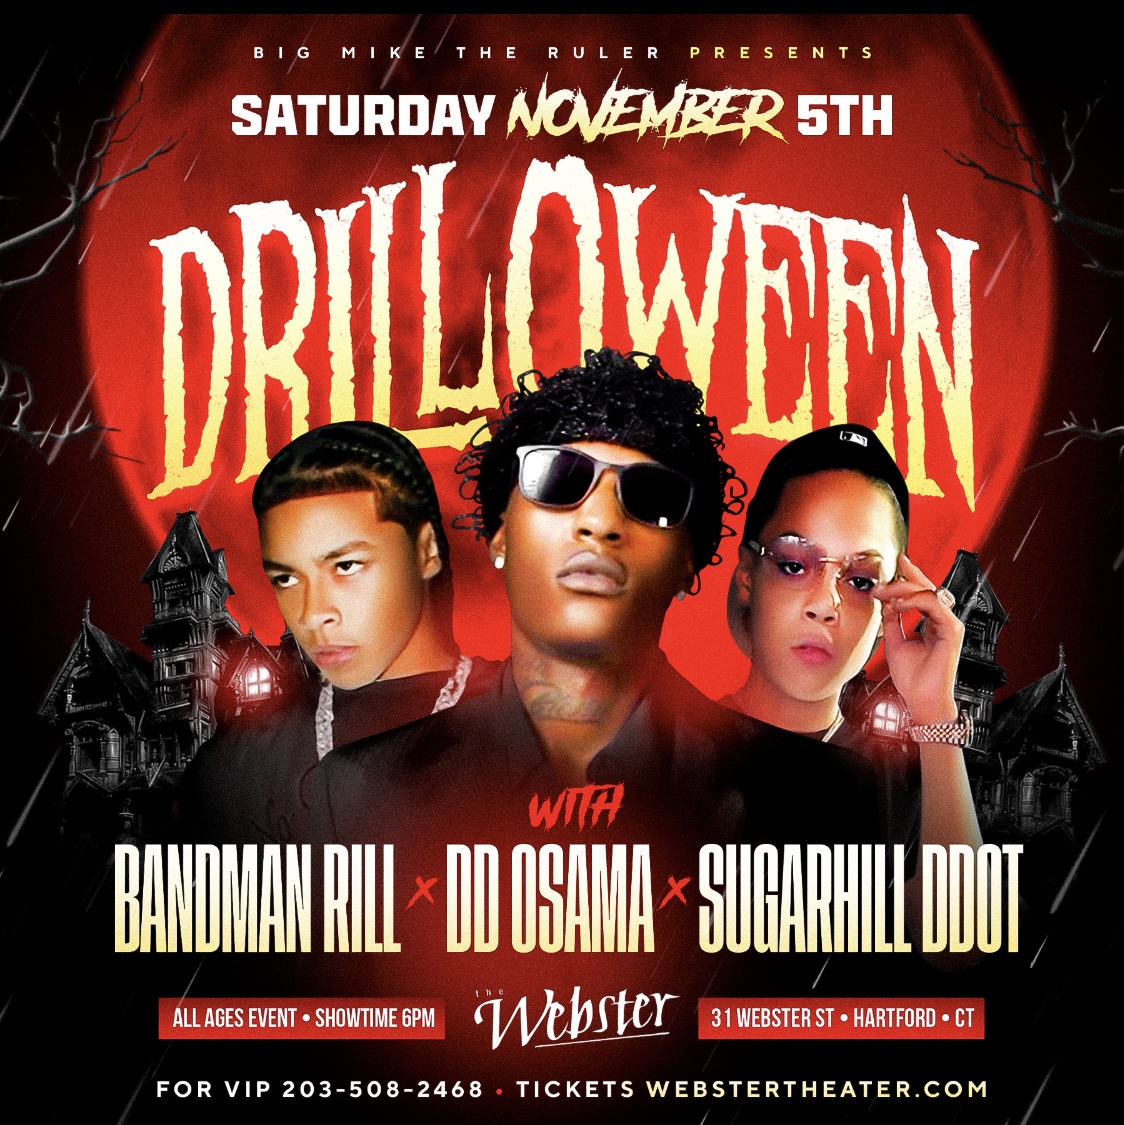 Buy Tickets to DRILLOWEEN with Bandman Rill, DD Osama, and SugarHill